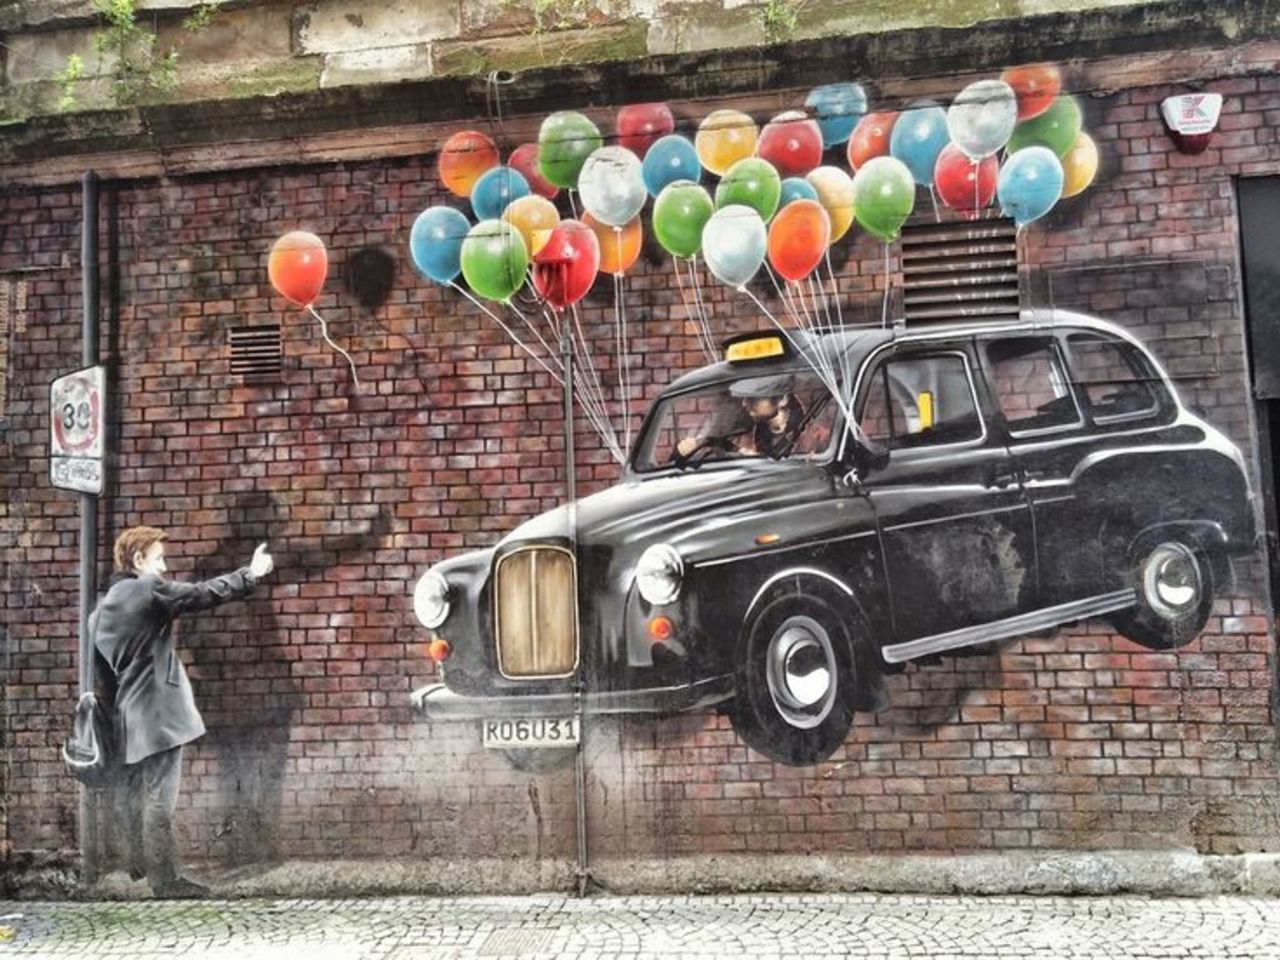 #graffiti #taxi #balloons #StreetArtHave a great week! https://t.co/qNfPARwFjO